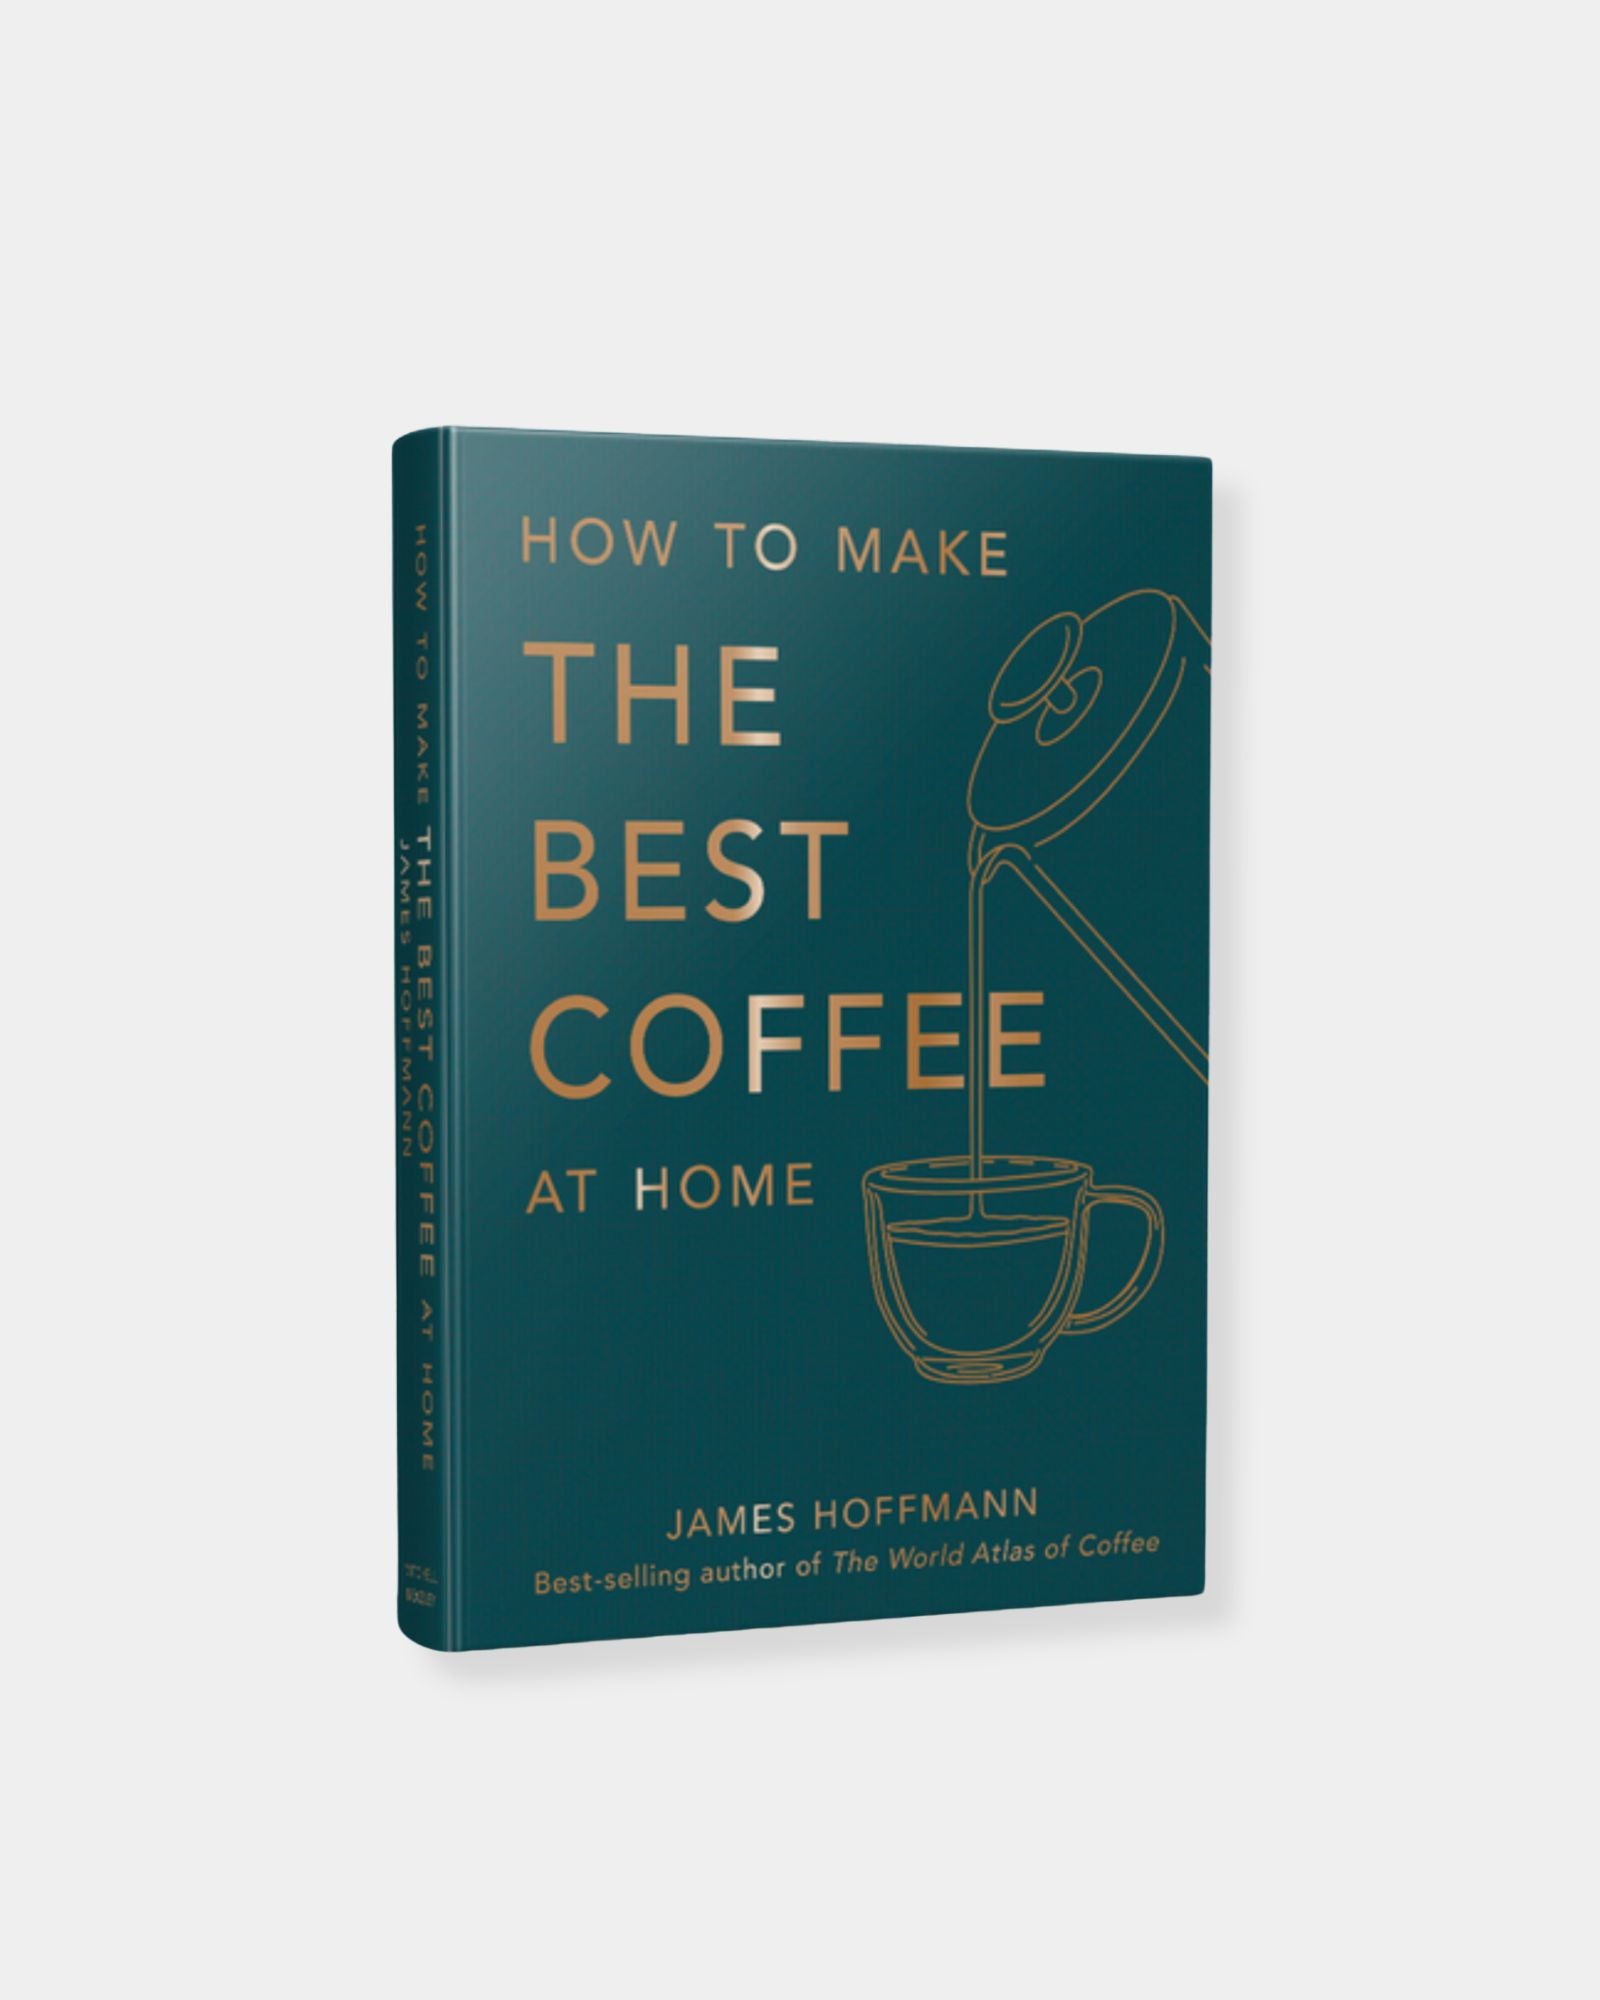 HOW TO MAKE THE BEST COFFEE - BOOK